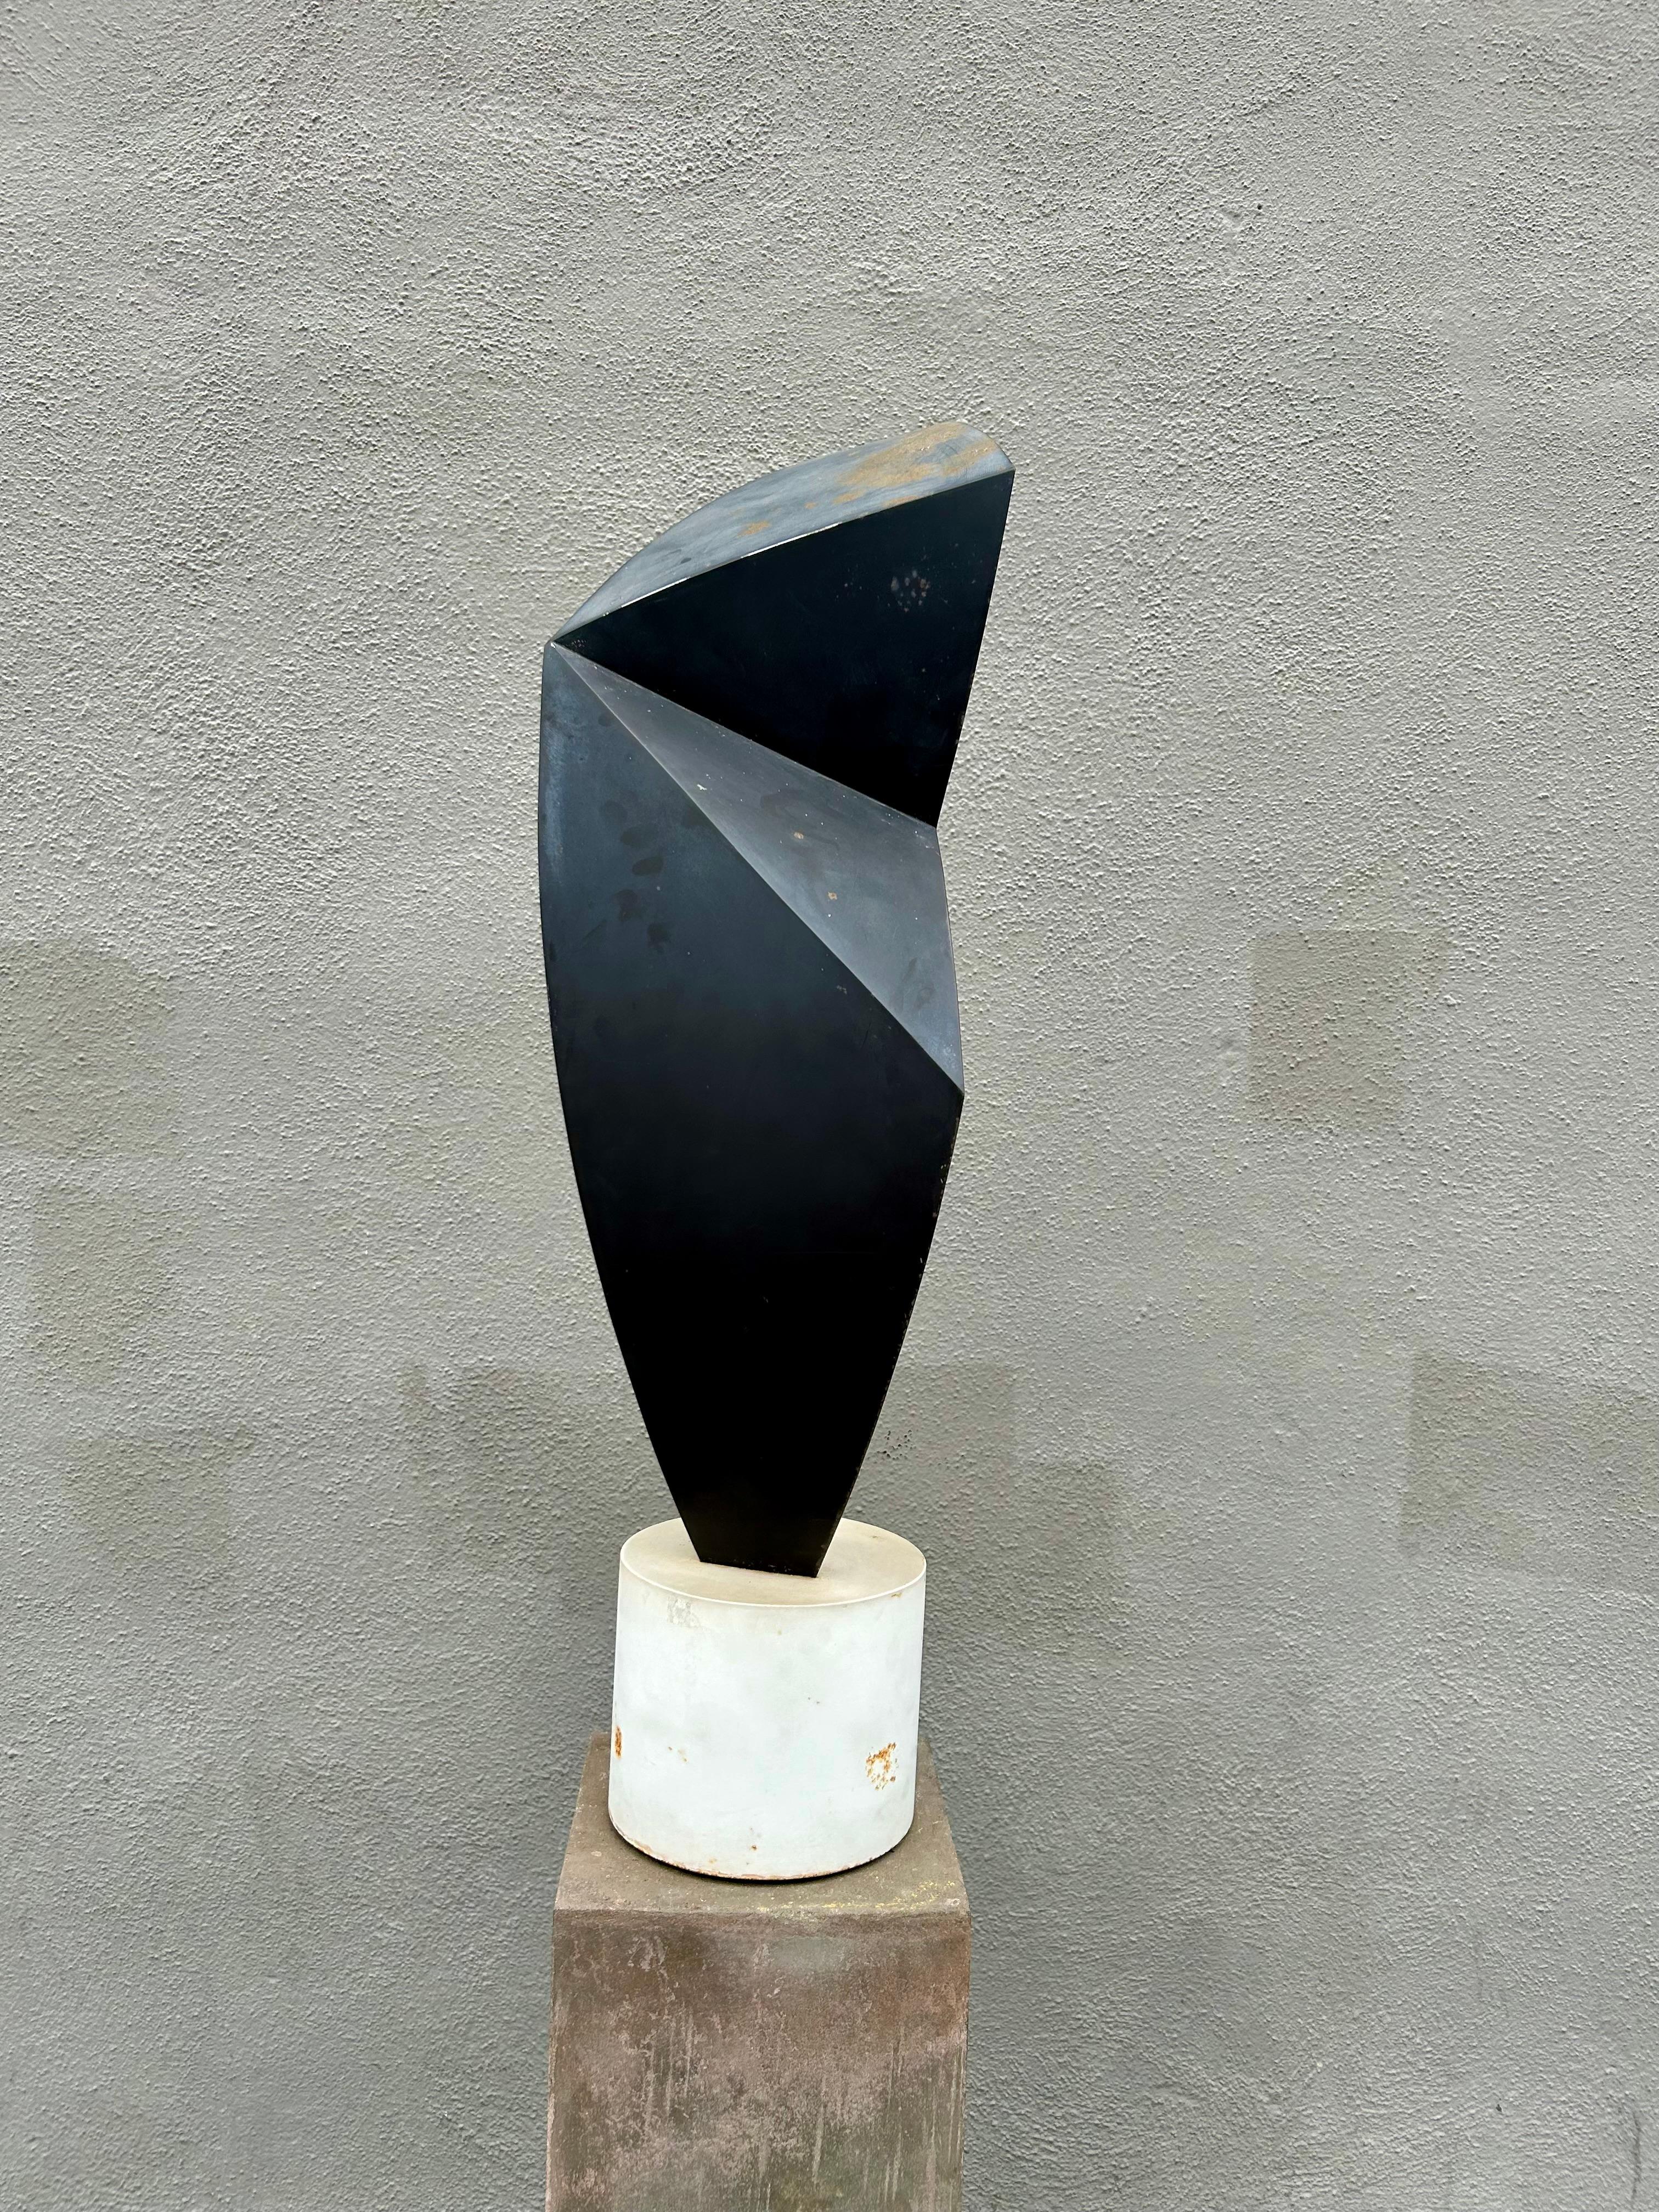 1950 - present
California based artist.
His sculptures are in collections throughout the USA and Europe.
From a Beverly Hills estate.
Great modernist sculpture.
Geometric form on concrete base.
The sculpture sits into a steel ring insert that is